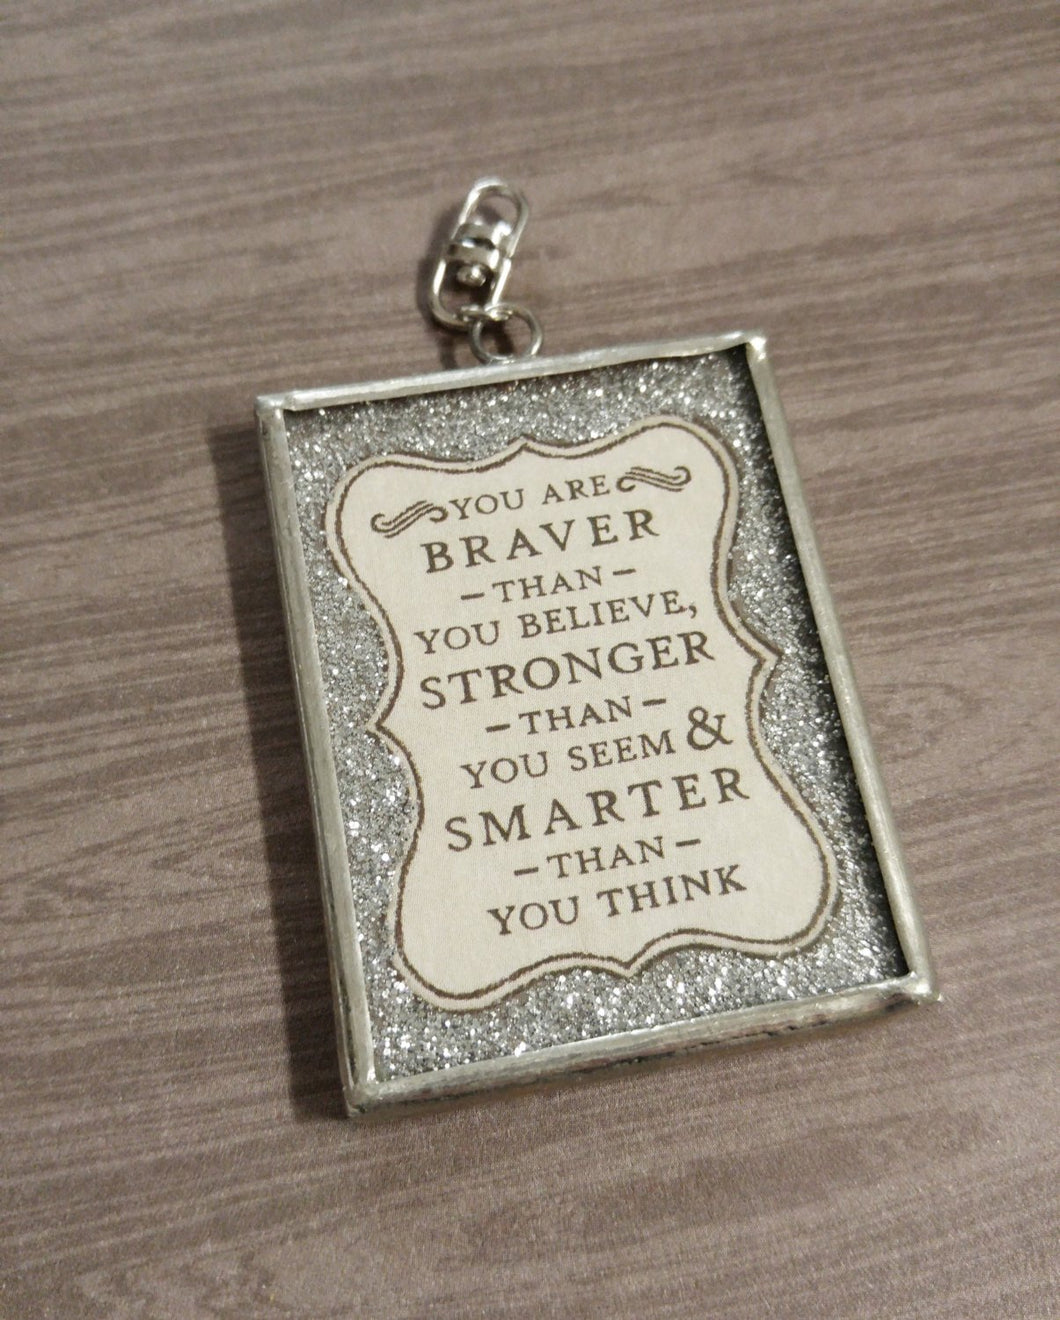 Word Pendant Frame Pendant Picture Frame Pendant Quote Pendant Glass Pendant Braver Than You Believe Stronger Than you Think Inspirational